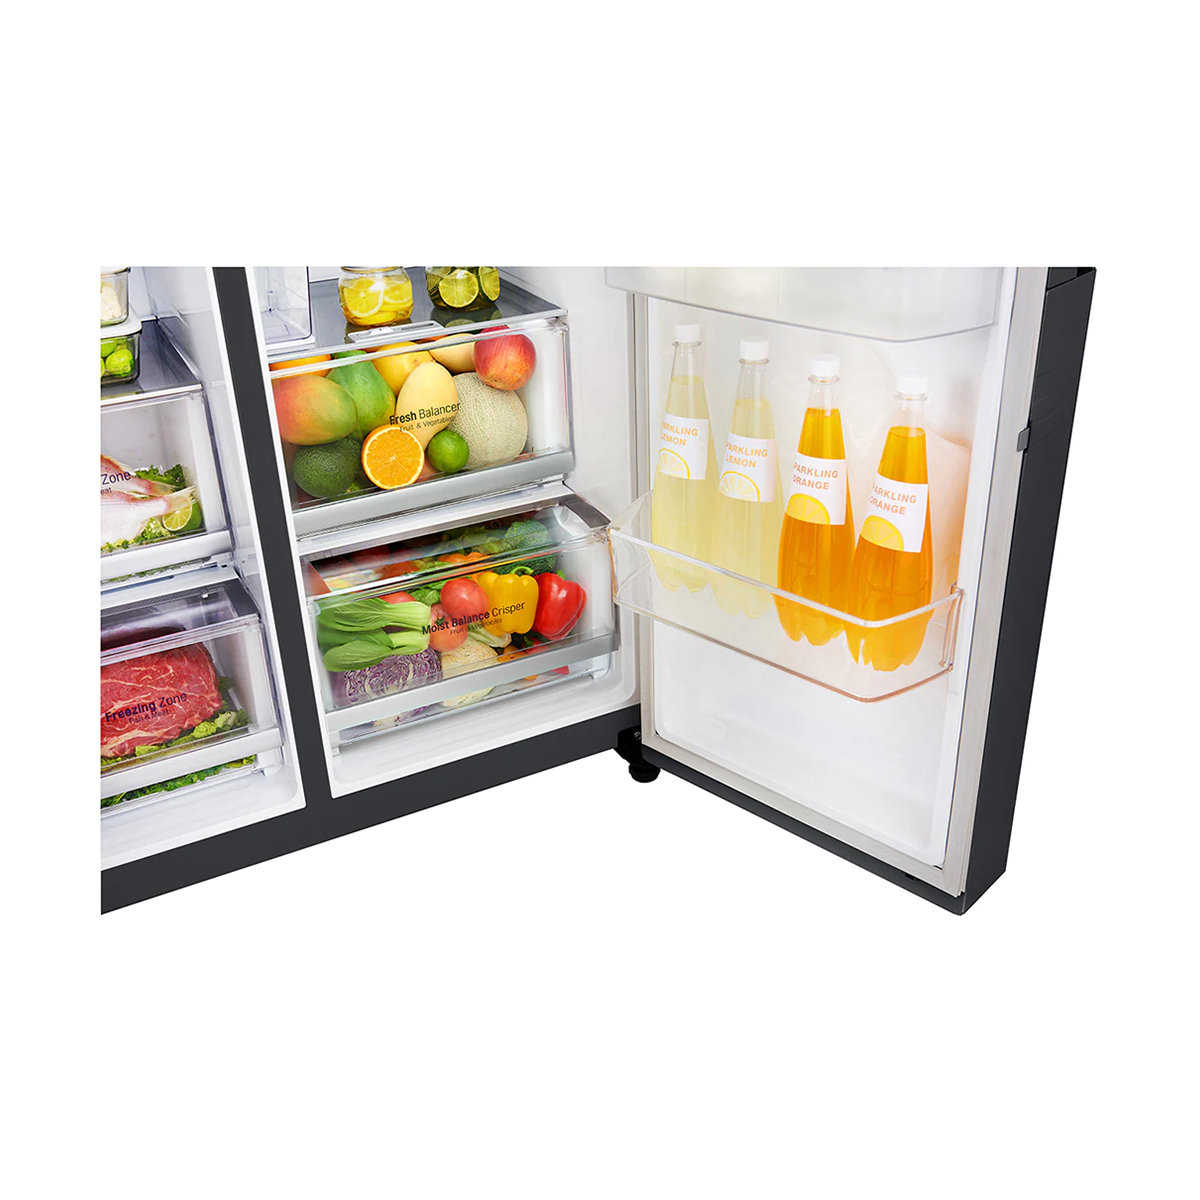 LG 668L Side-by-Side Refrigerator with Door Cooling+ Technology